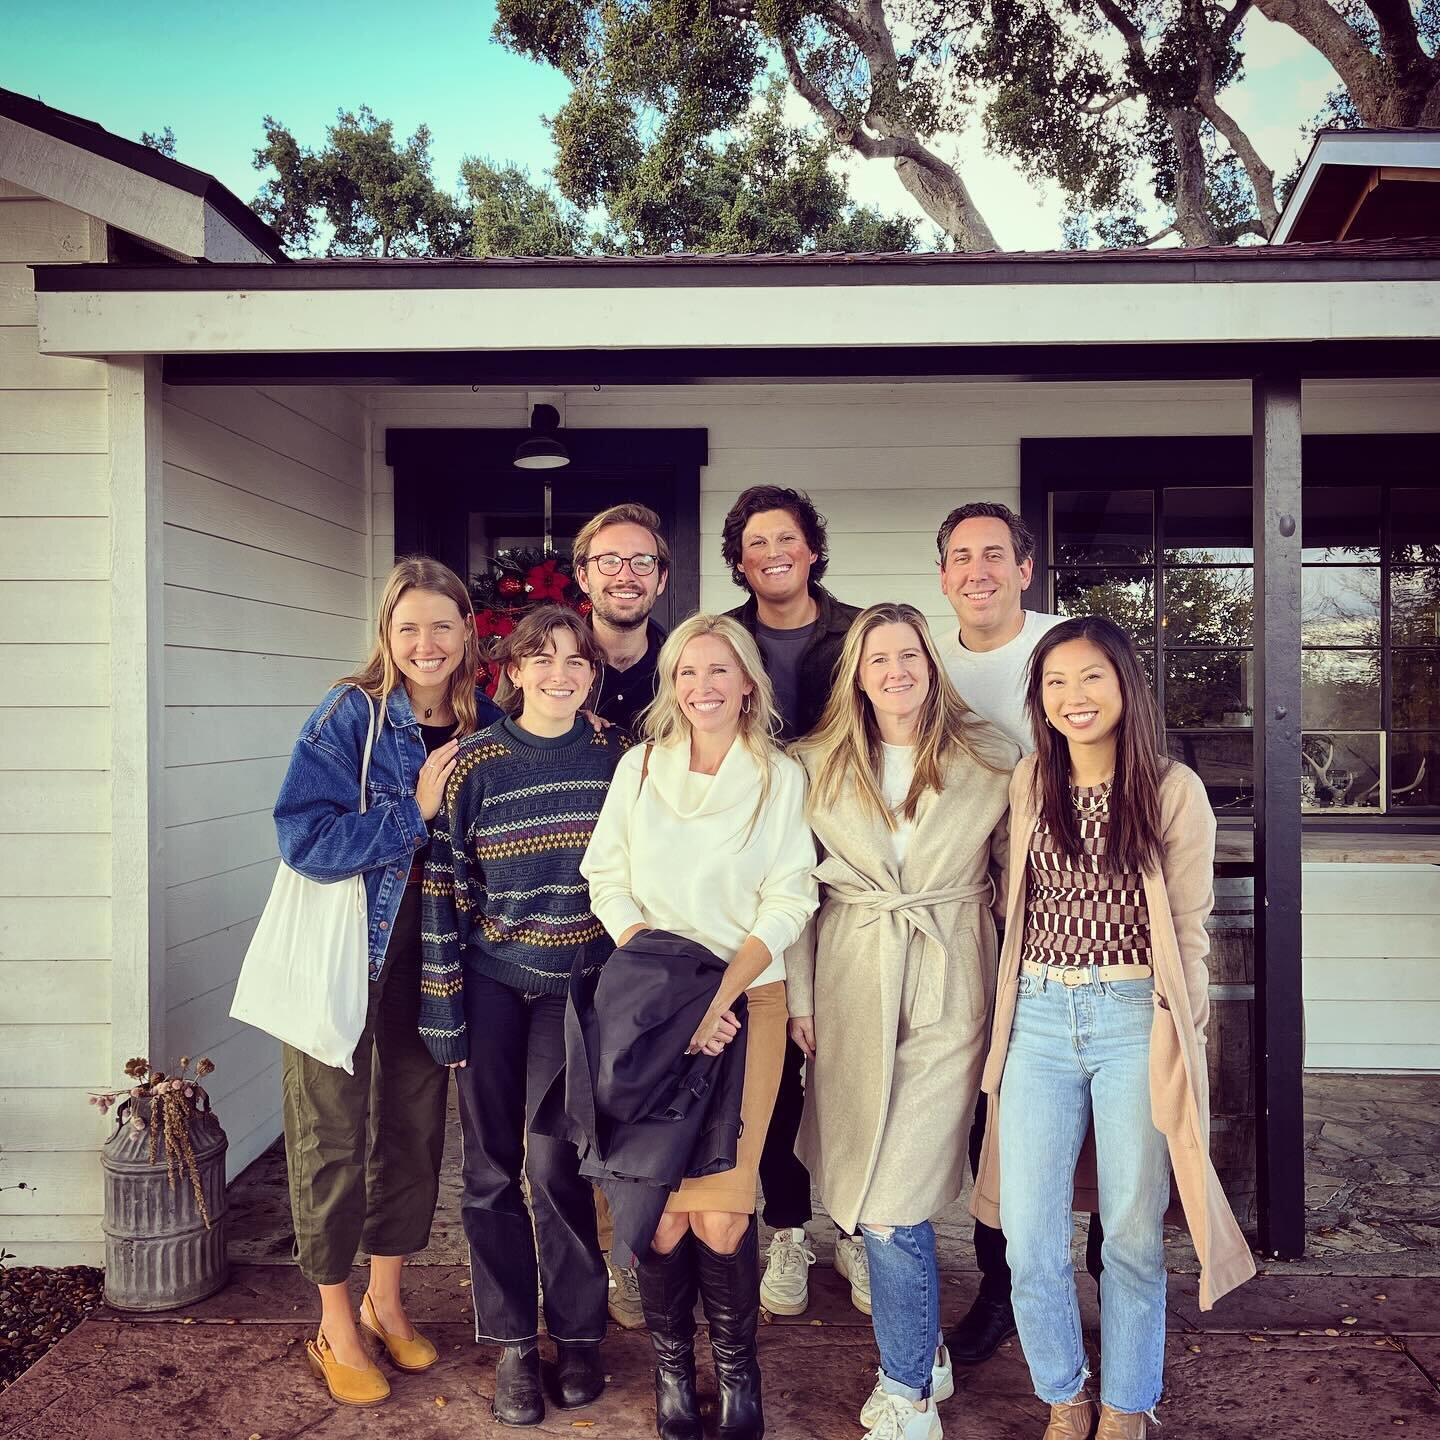 Beyond grateful for this growing team! An early holiday celebration together, minus our two remote nomads (not pictured).

#brockitecture #ryanbrockettarchitect #architect #architecture #arch #design #interiors #residential #commercial #centralcoast 